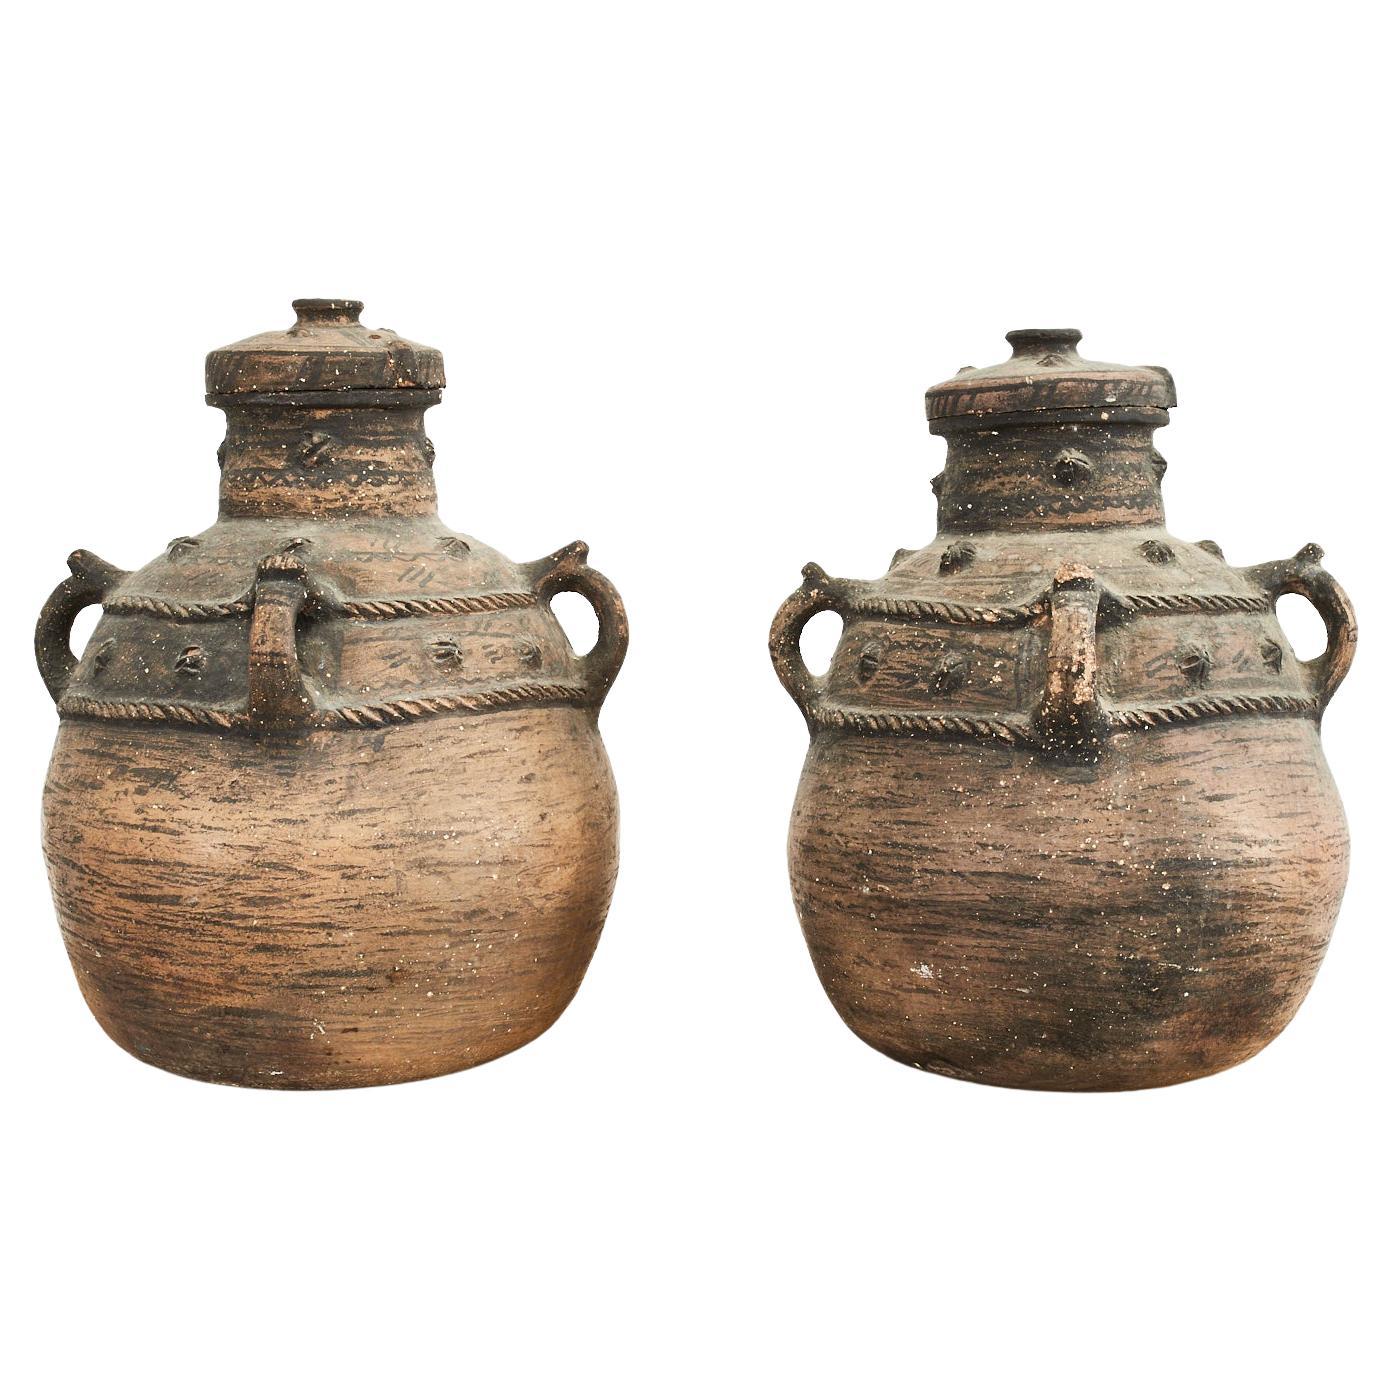 Pair of Large Mexican Pottery Lidded Vases or Urns